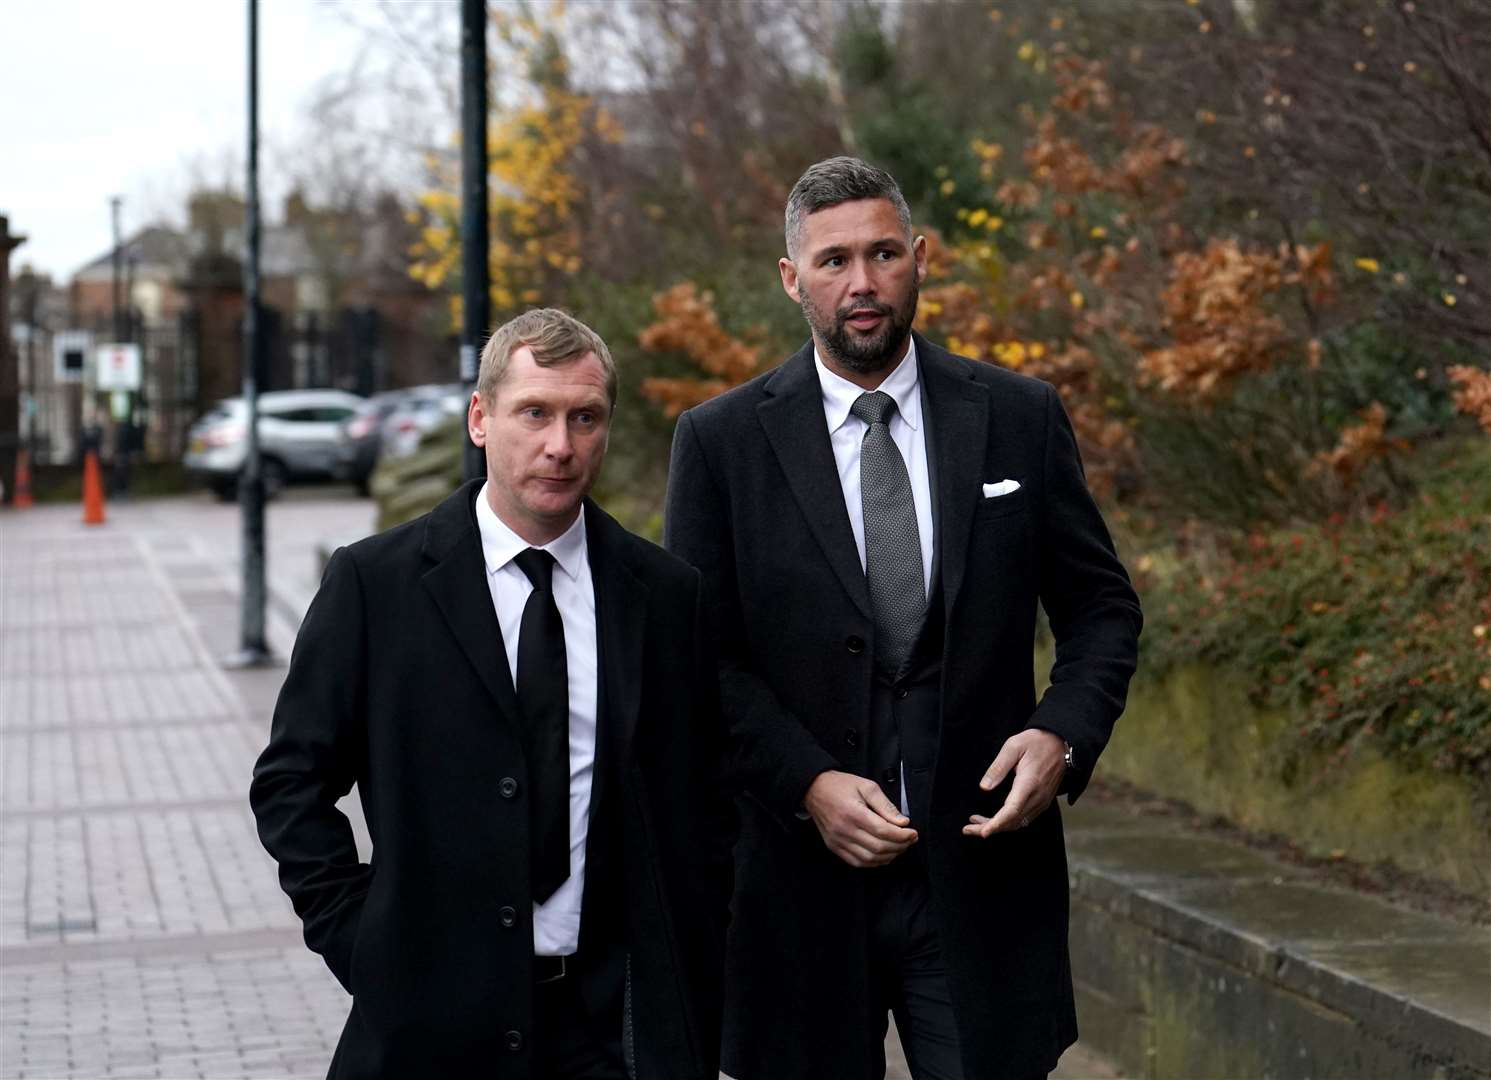 Former Everton player Tony Hibbert (left) and former boxer Tony Bellew (right) arrive at the service (Martin Rickett/PA)